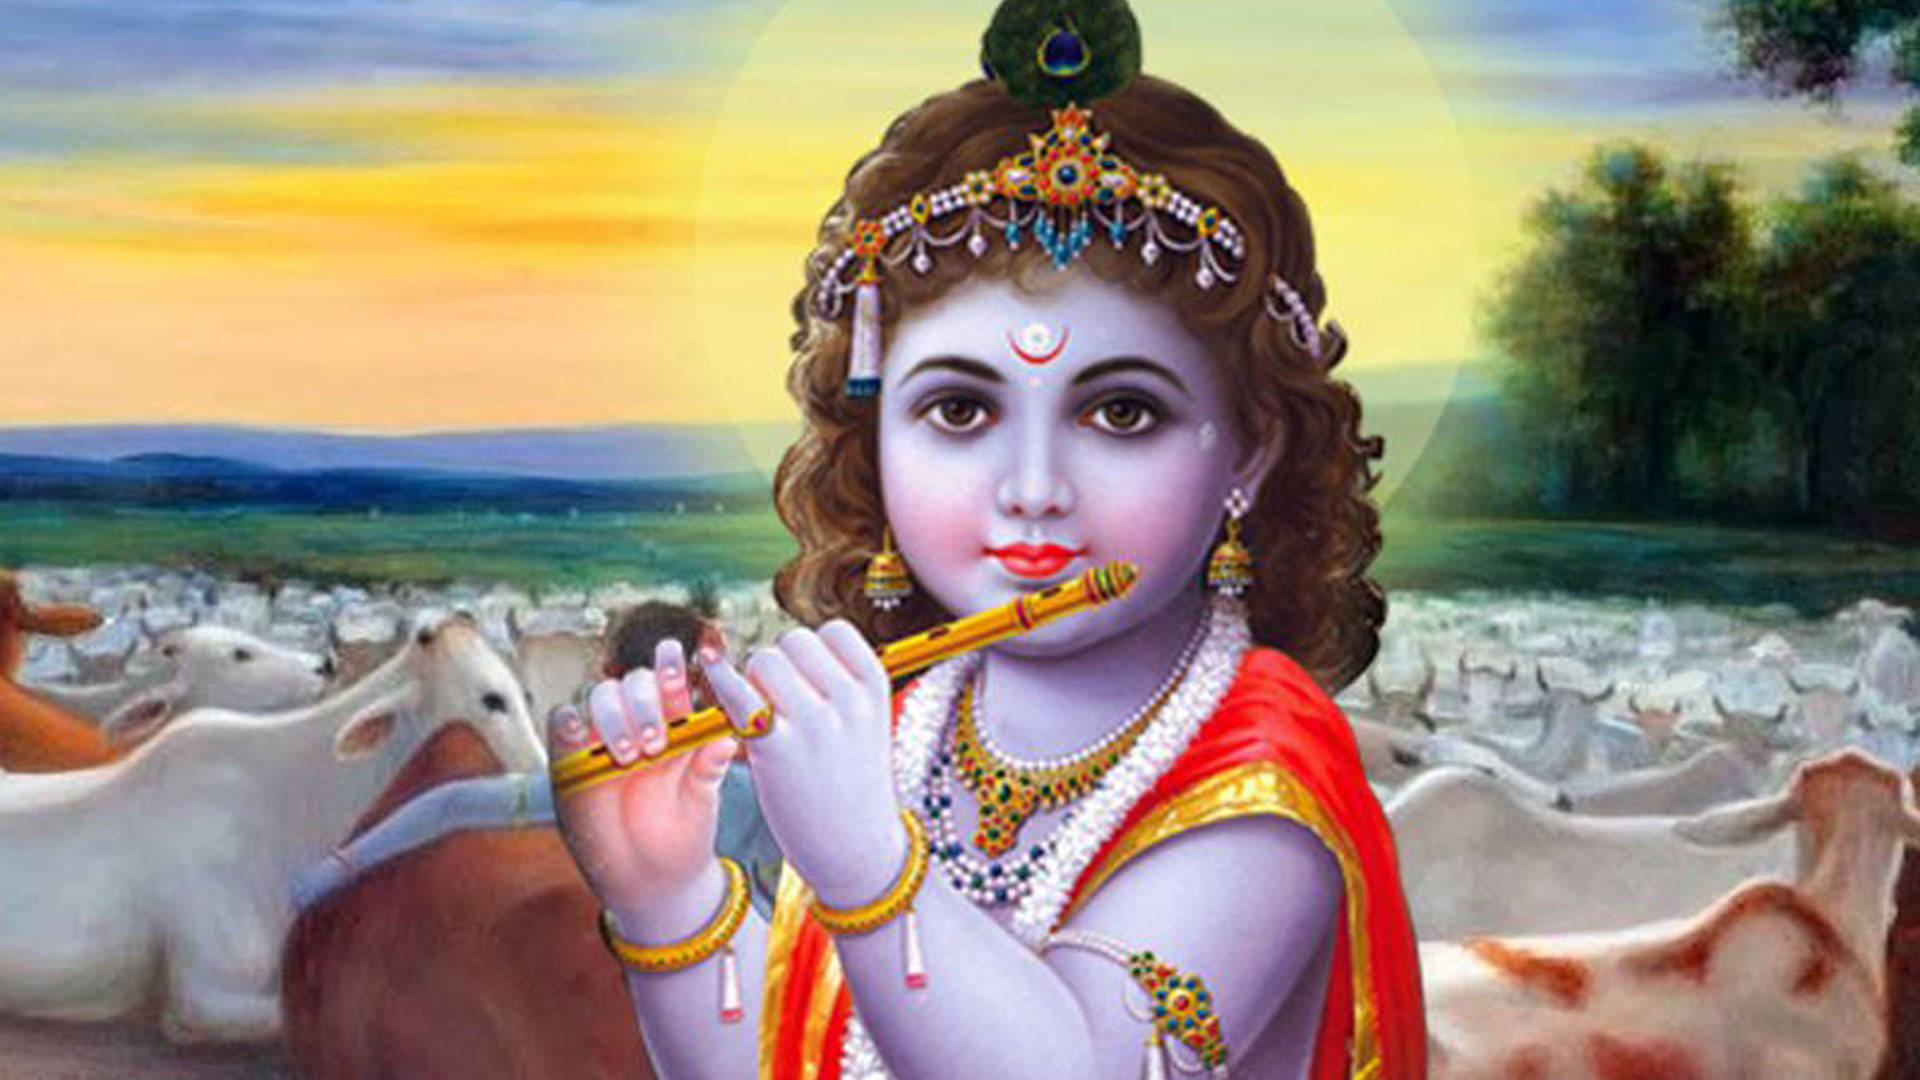 Caption: Divine And Adorable, Little Krishna In Hd